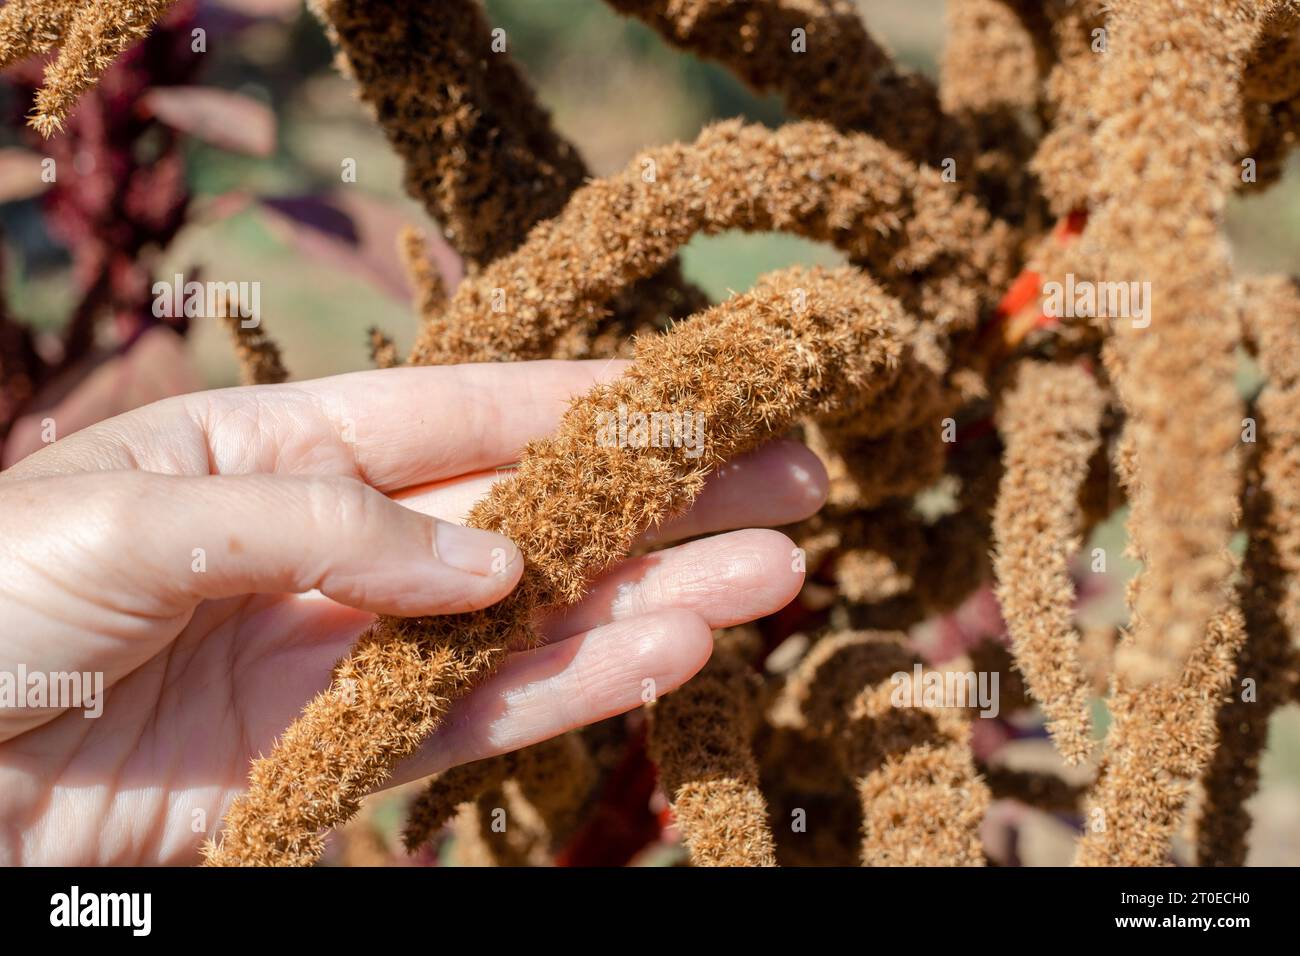 The gardener holds the ripened seeds of the agricultural plant vegetable amaranth in his hand. Stock Photo